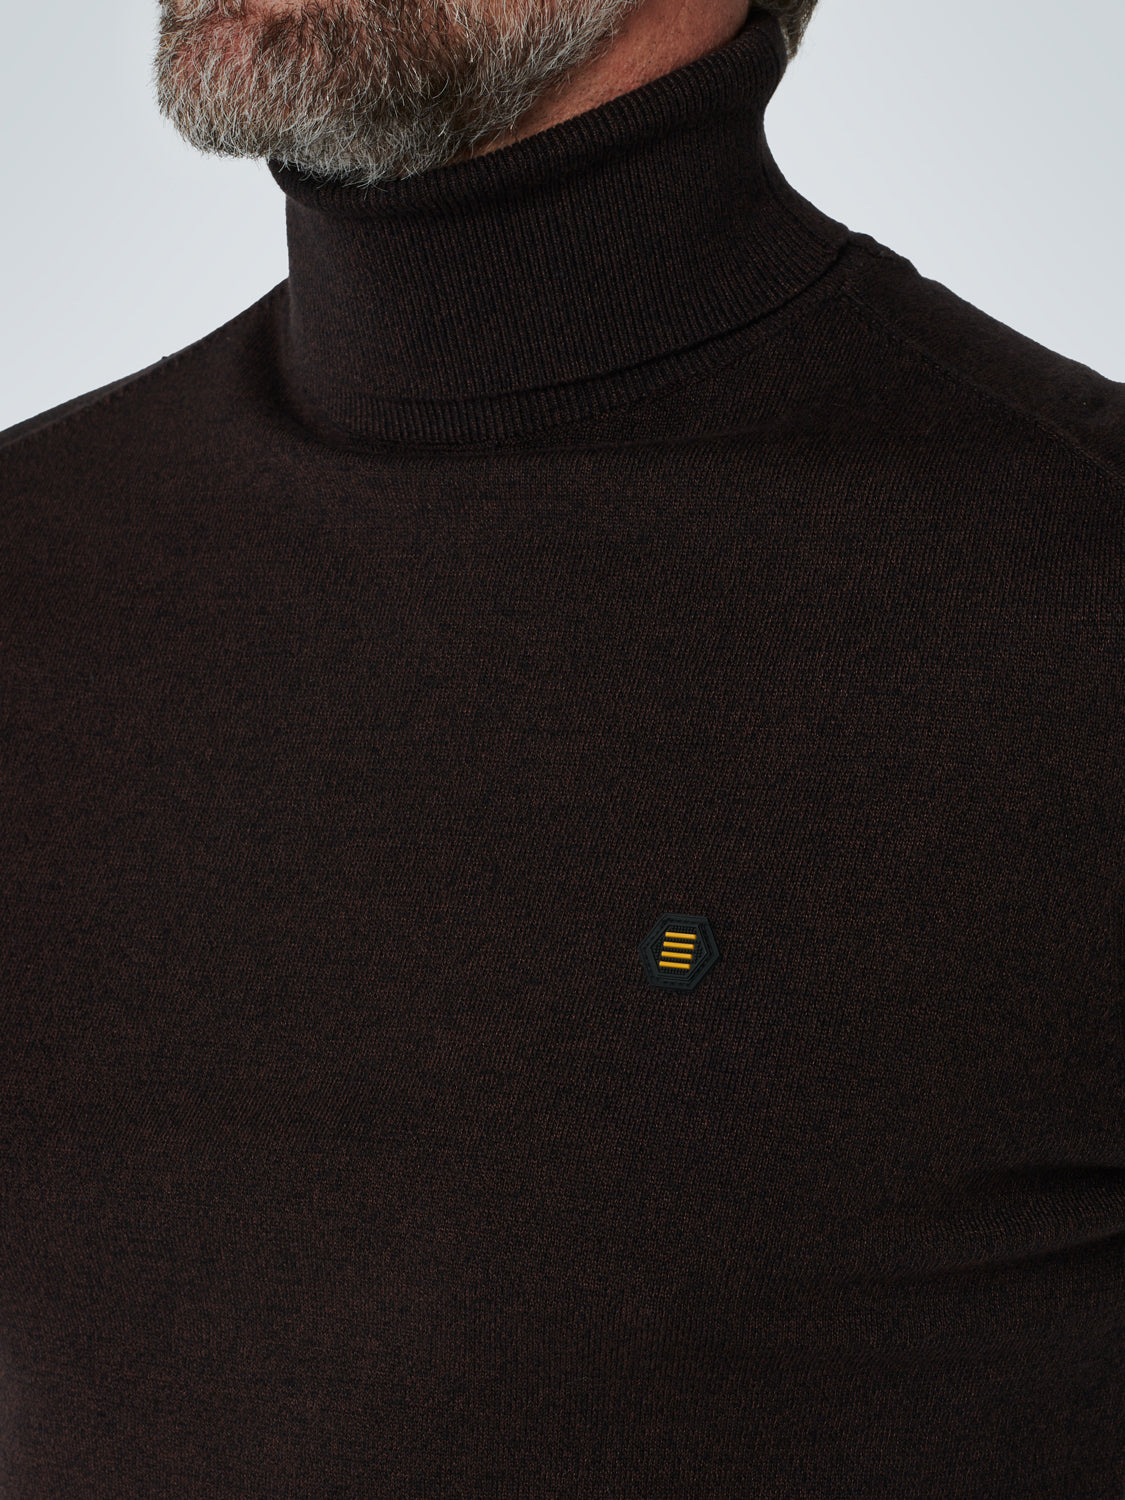 NXS 2 COLOURED KNIT ROLLNECK